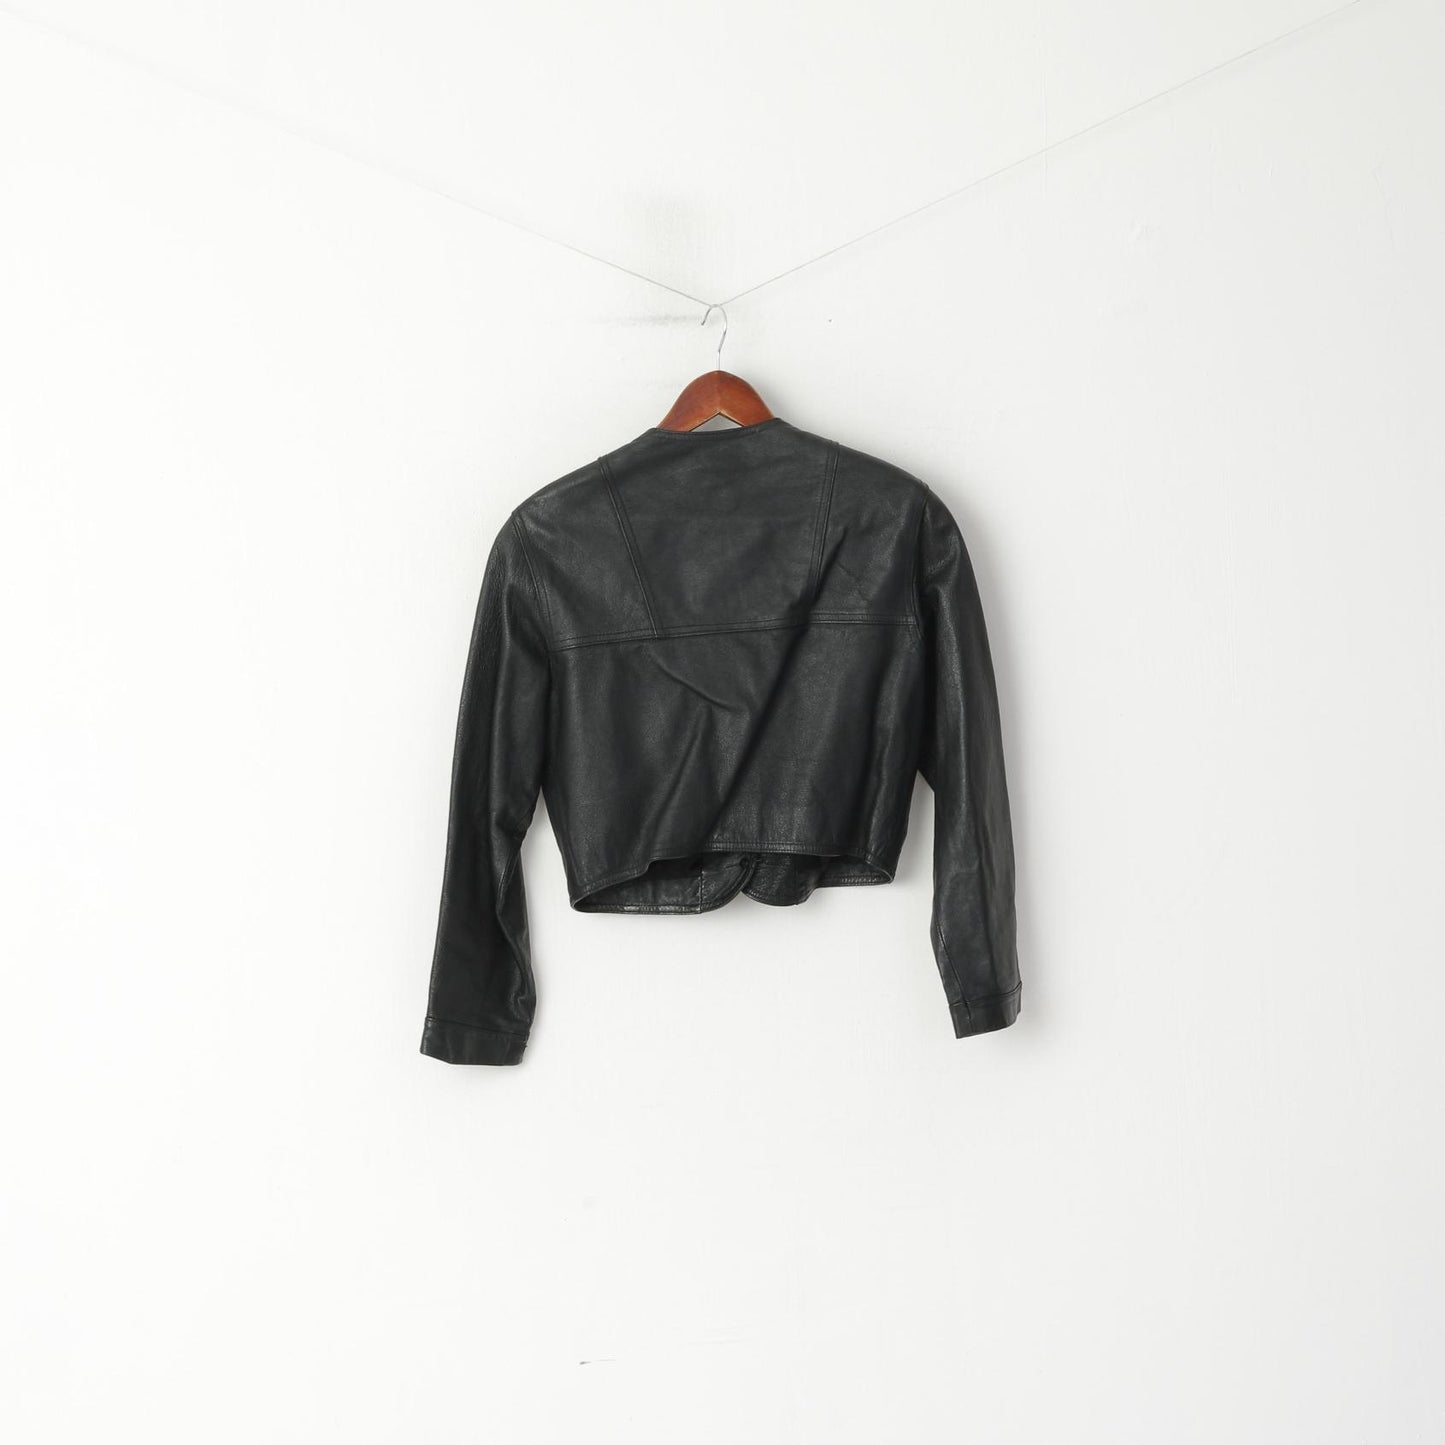 Clever Made For You Women 36 S Cropped Jacket Black Leather Shoulder Pads Top